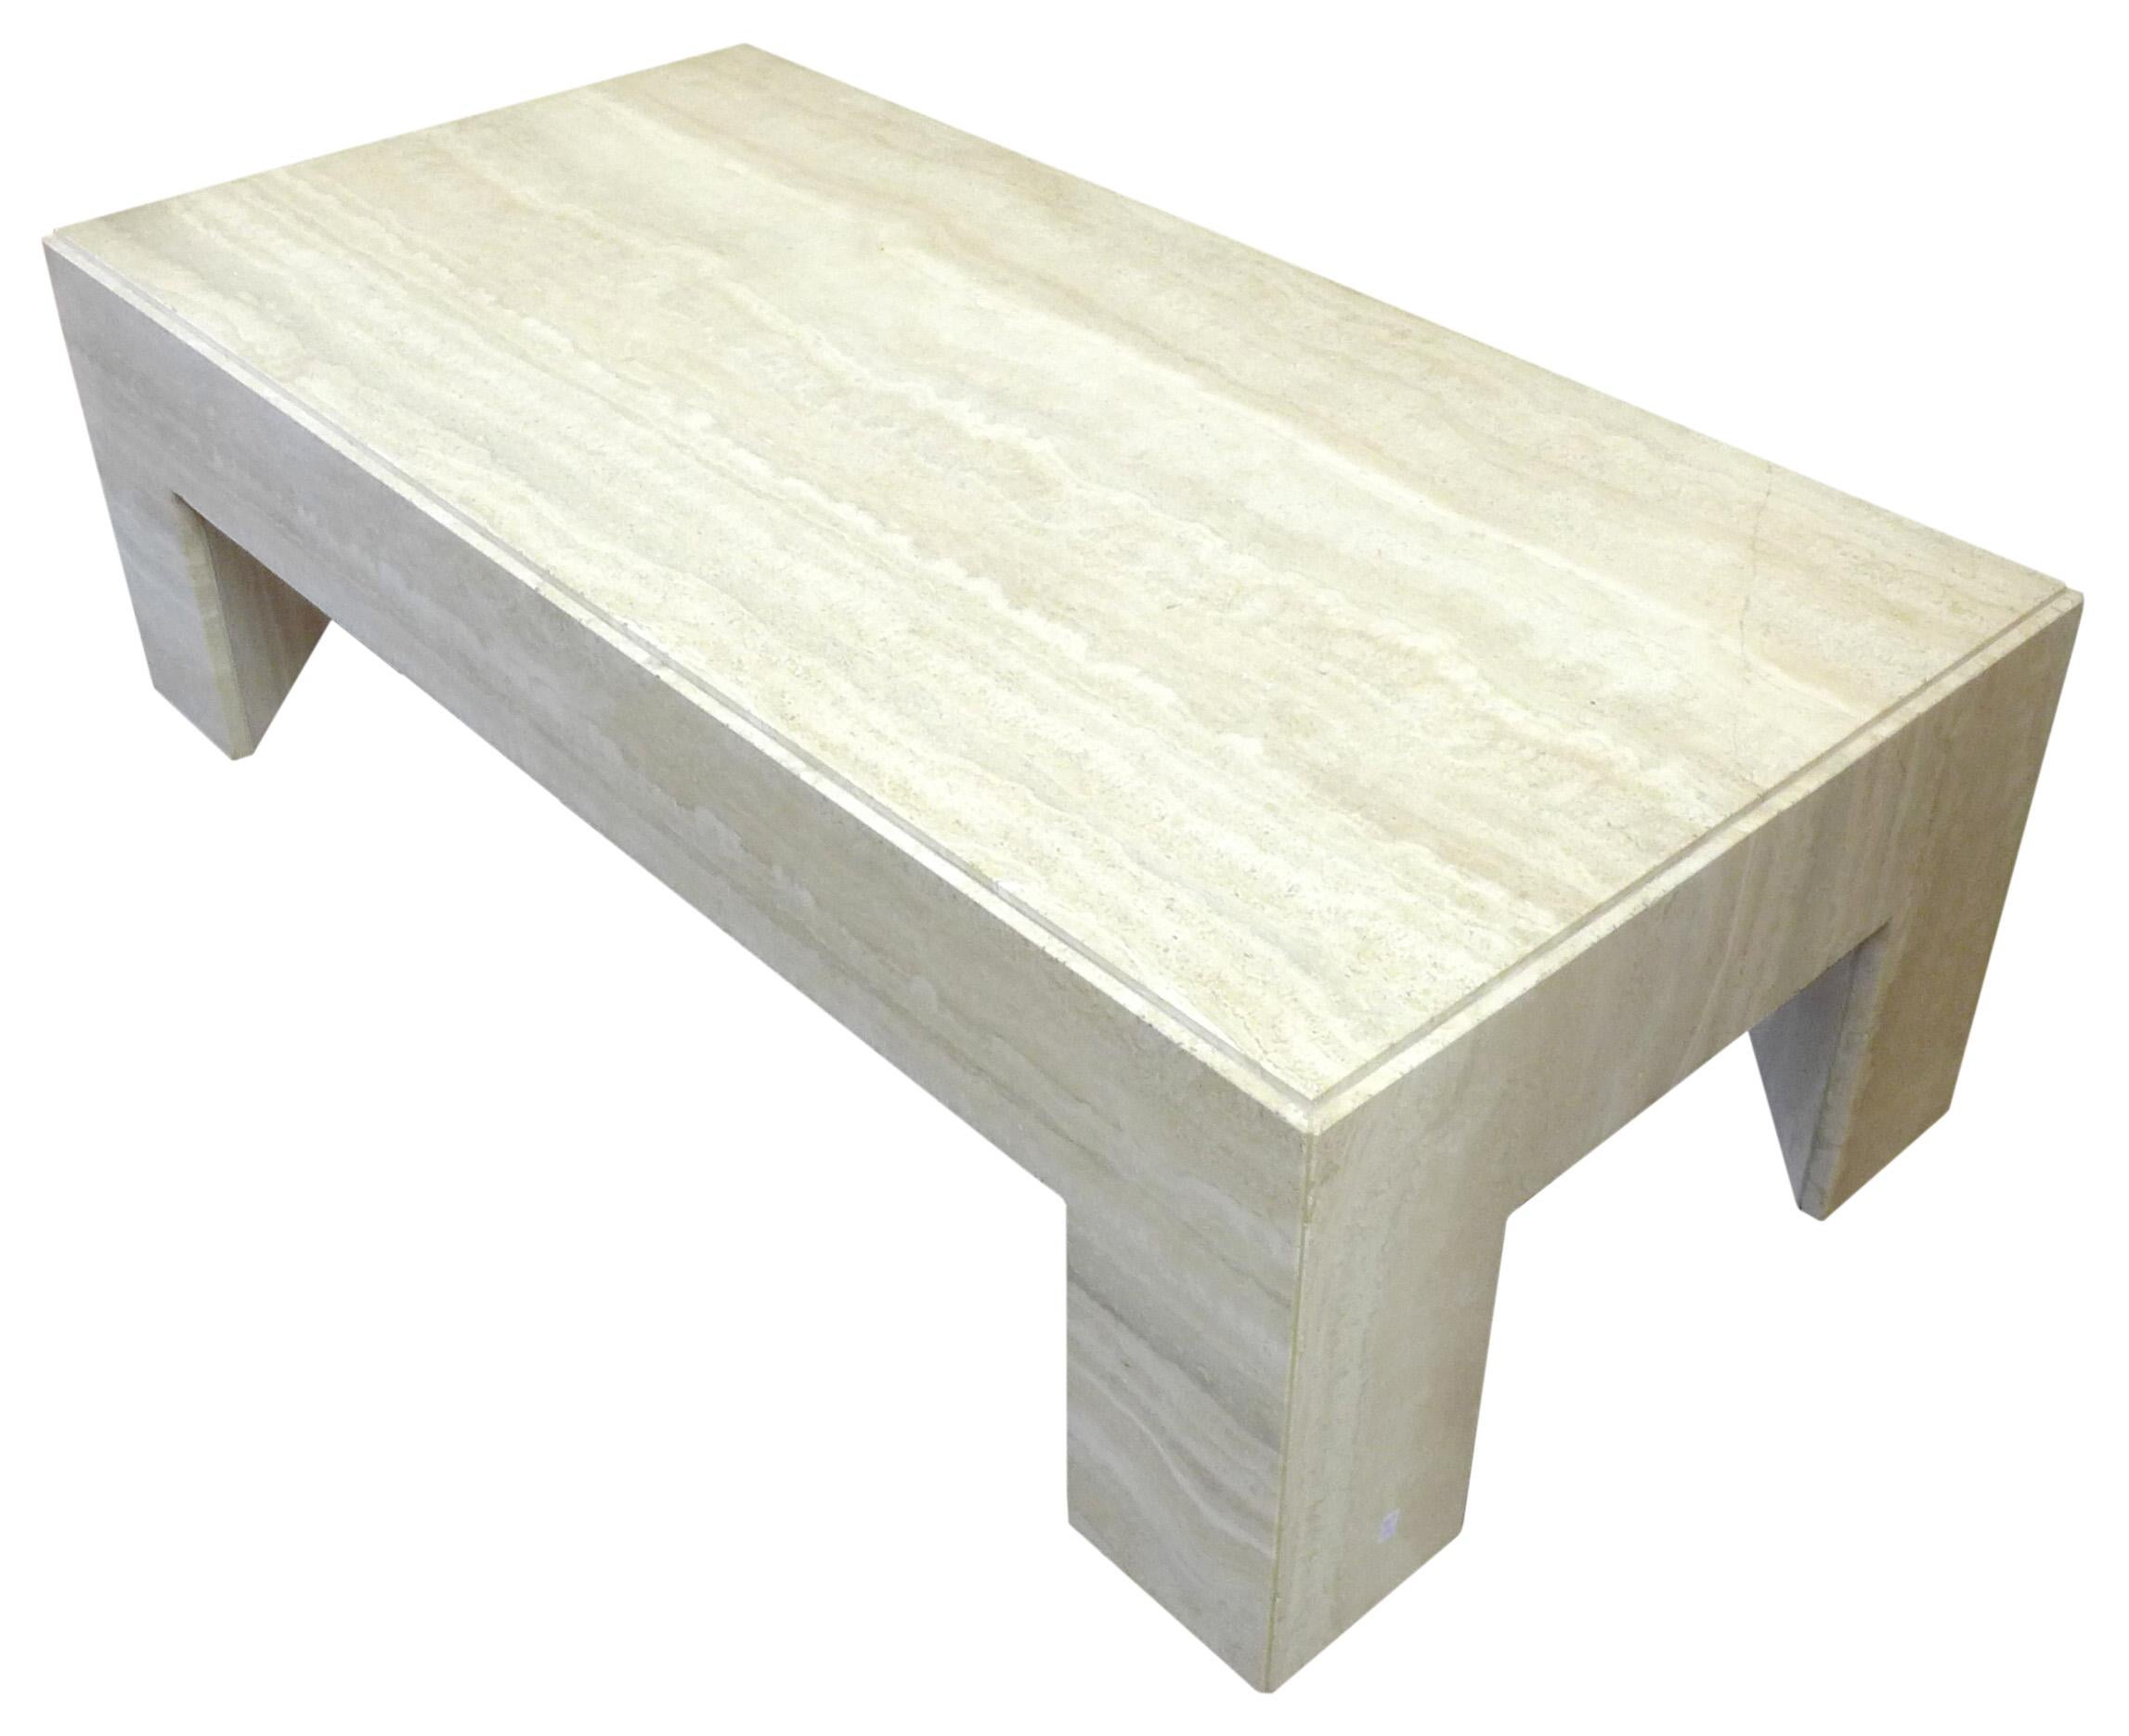 A fantastic, massive travertine coffee table. A simple yet powerful form beautifully assembled of polished travertine slabs. Nice subtle details with a slightly stepped table top and triangular legs. Great, impressive scale, proportion and material.